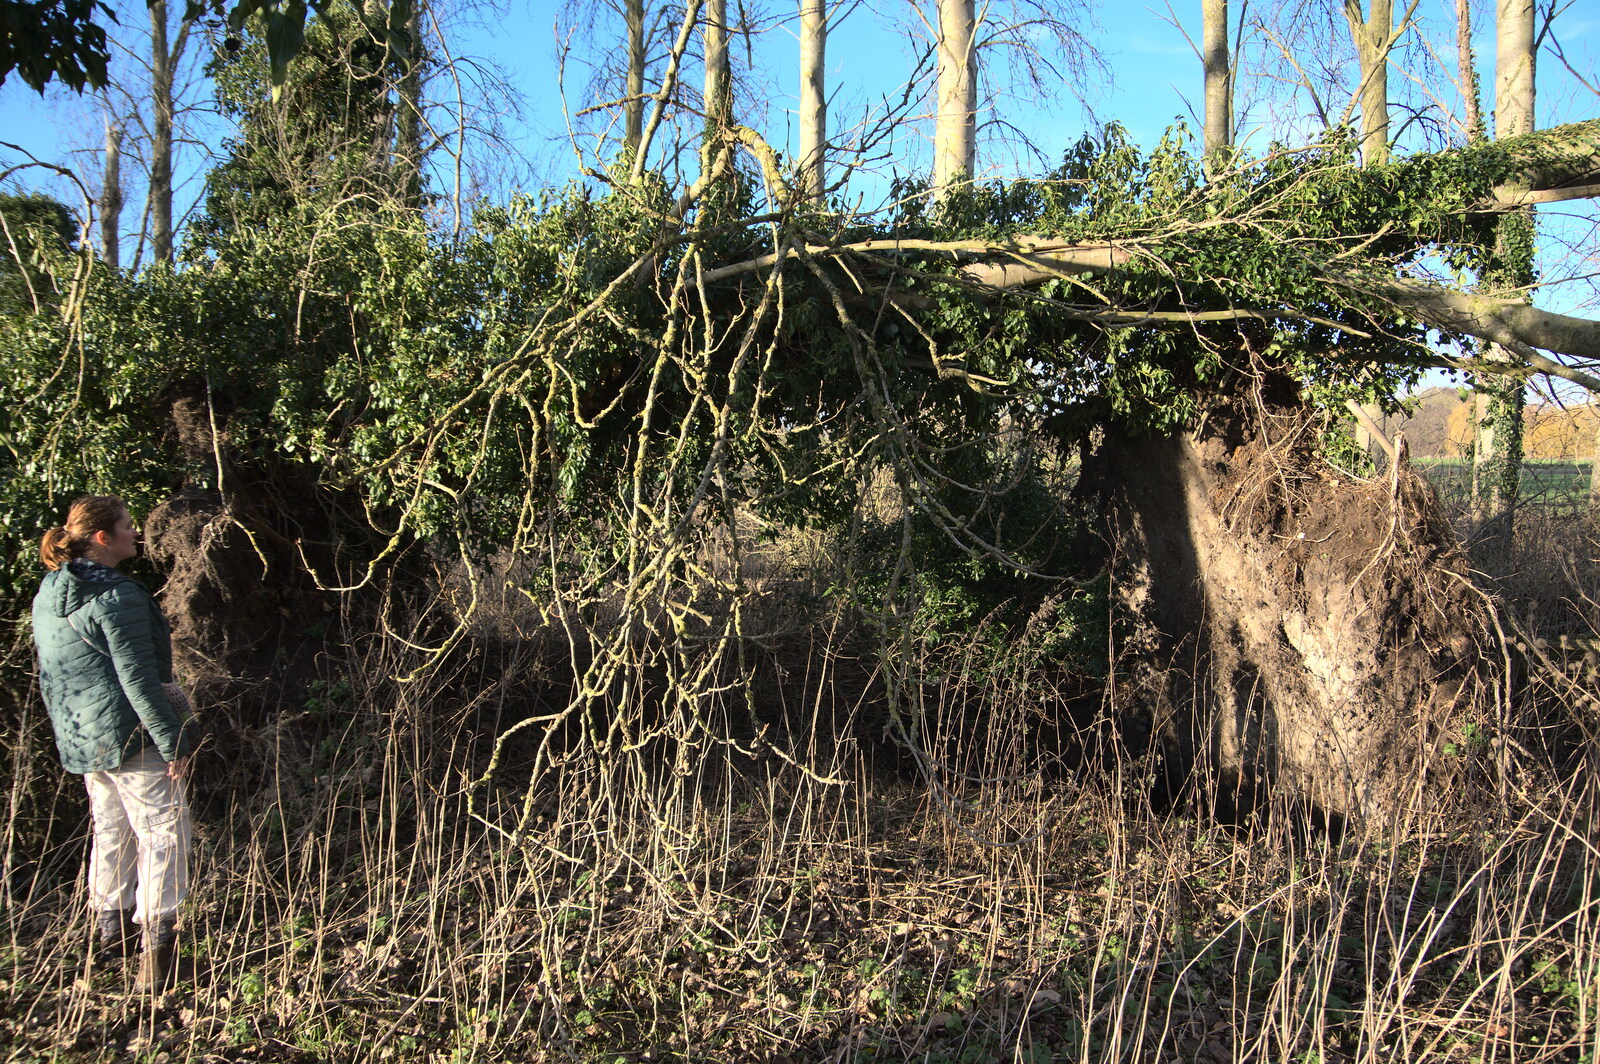 Winter Walks around Brome and Hoxne, Suffolk - 2nd January 2023: Isobel inspects a whole row of uprooted trees